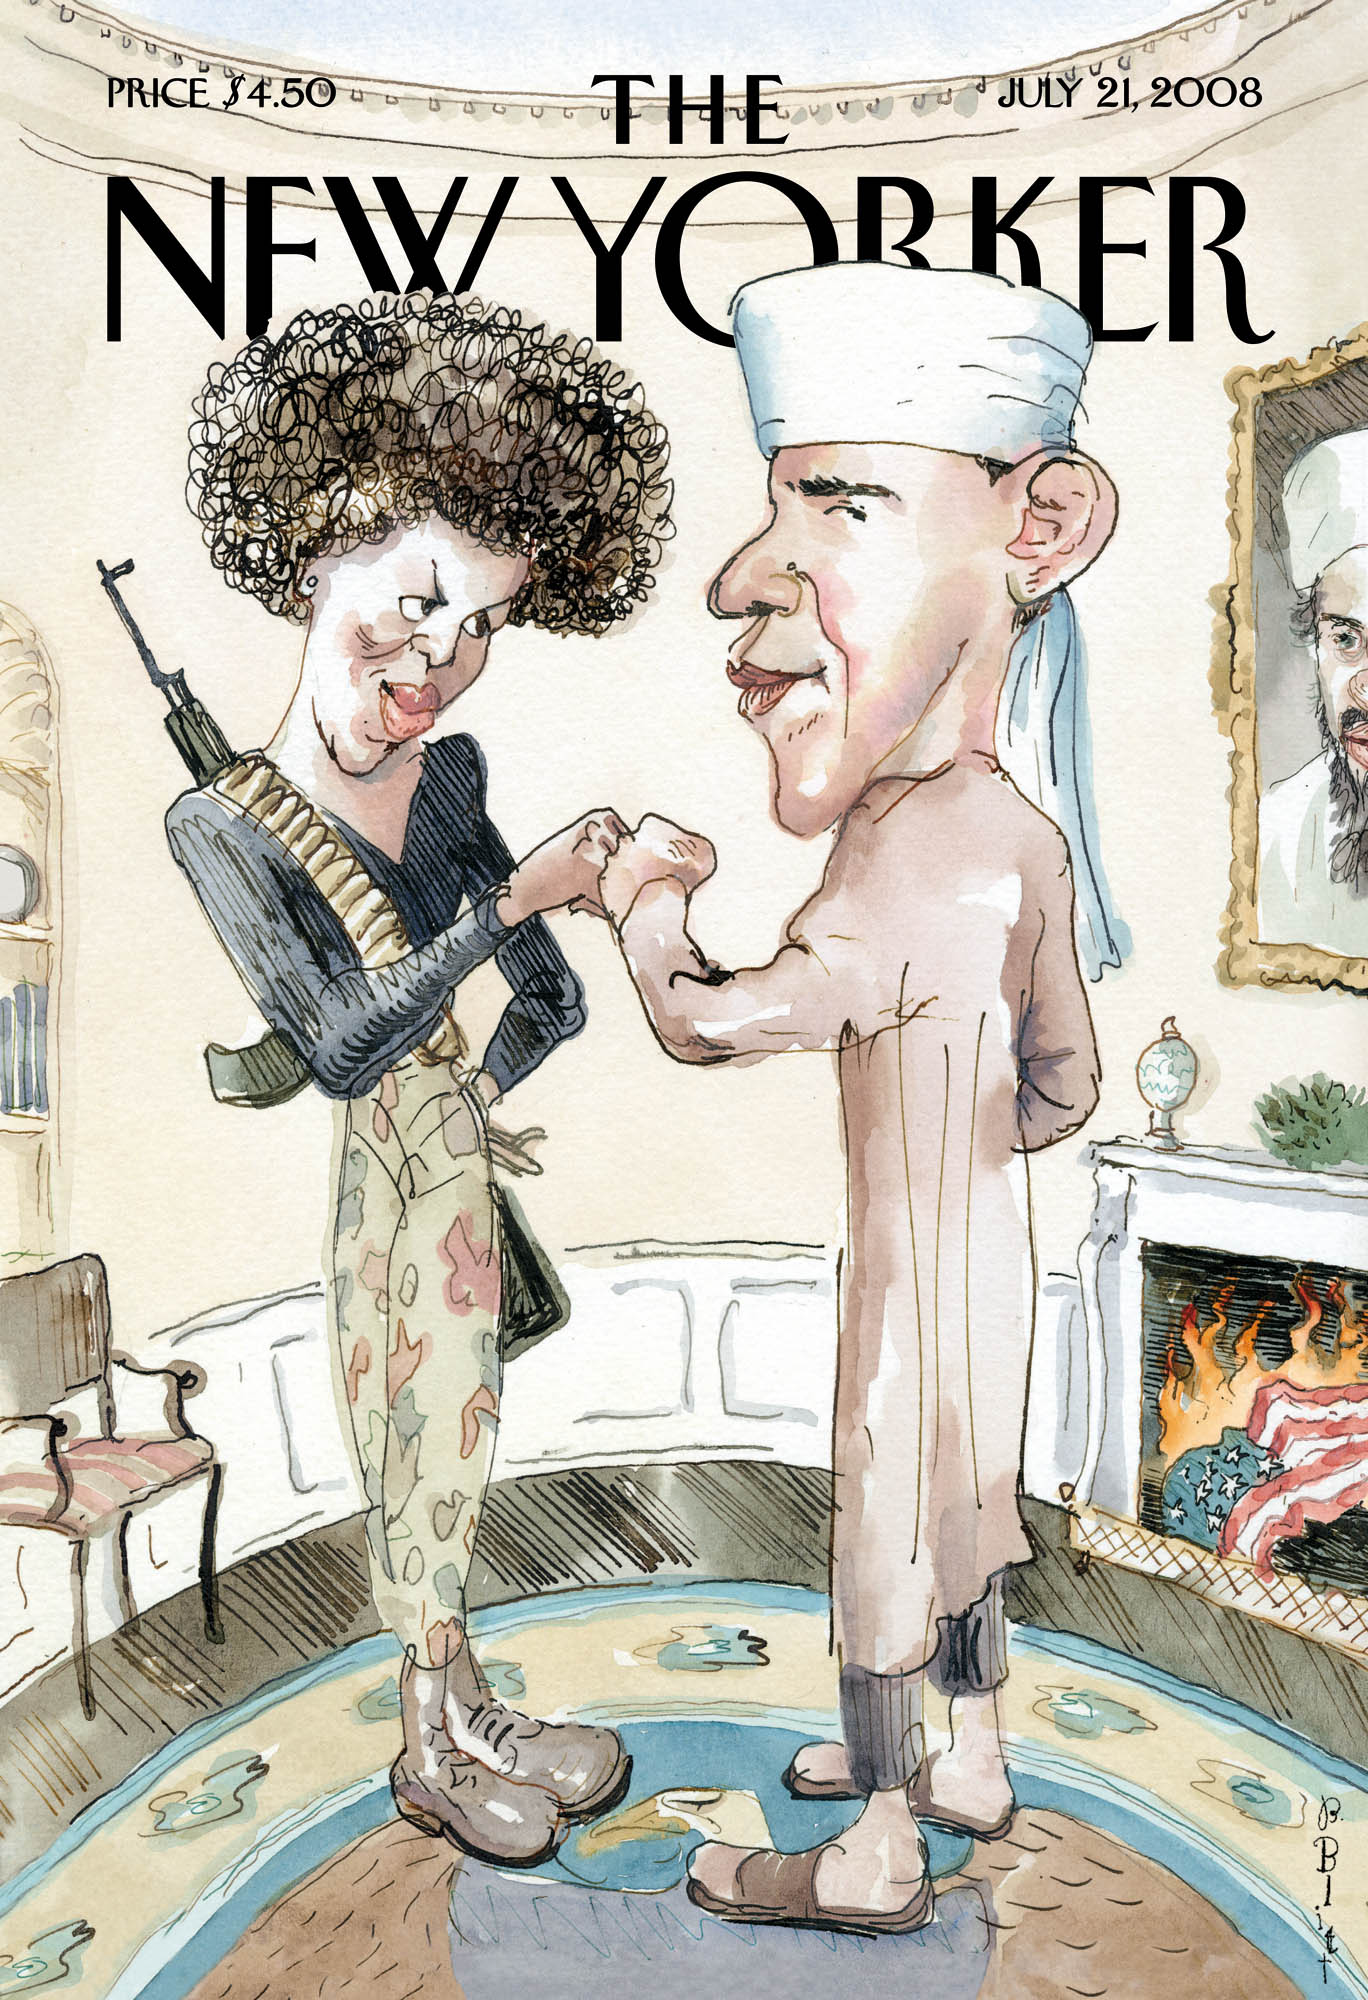 Barack Hussein Obama and wife Michelle cartoon on New Yorker July 21, 2008 cover by Magazine illustrator Barry Blitt.